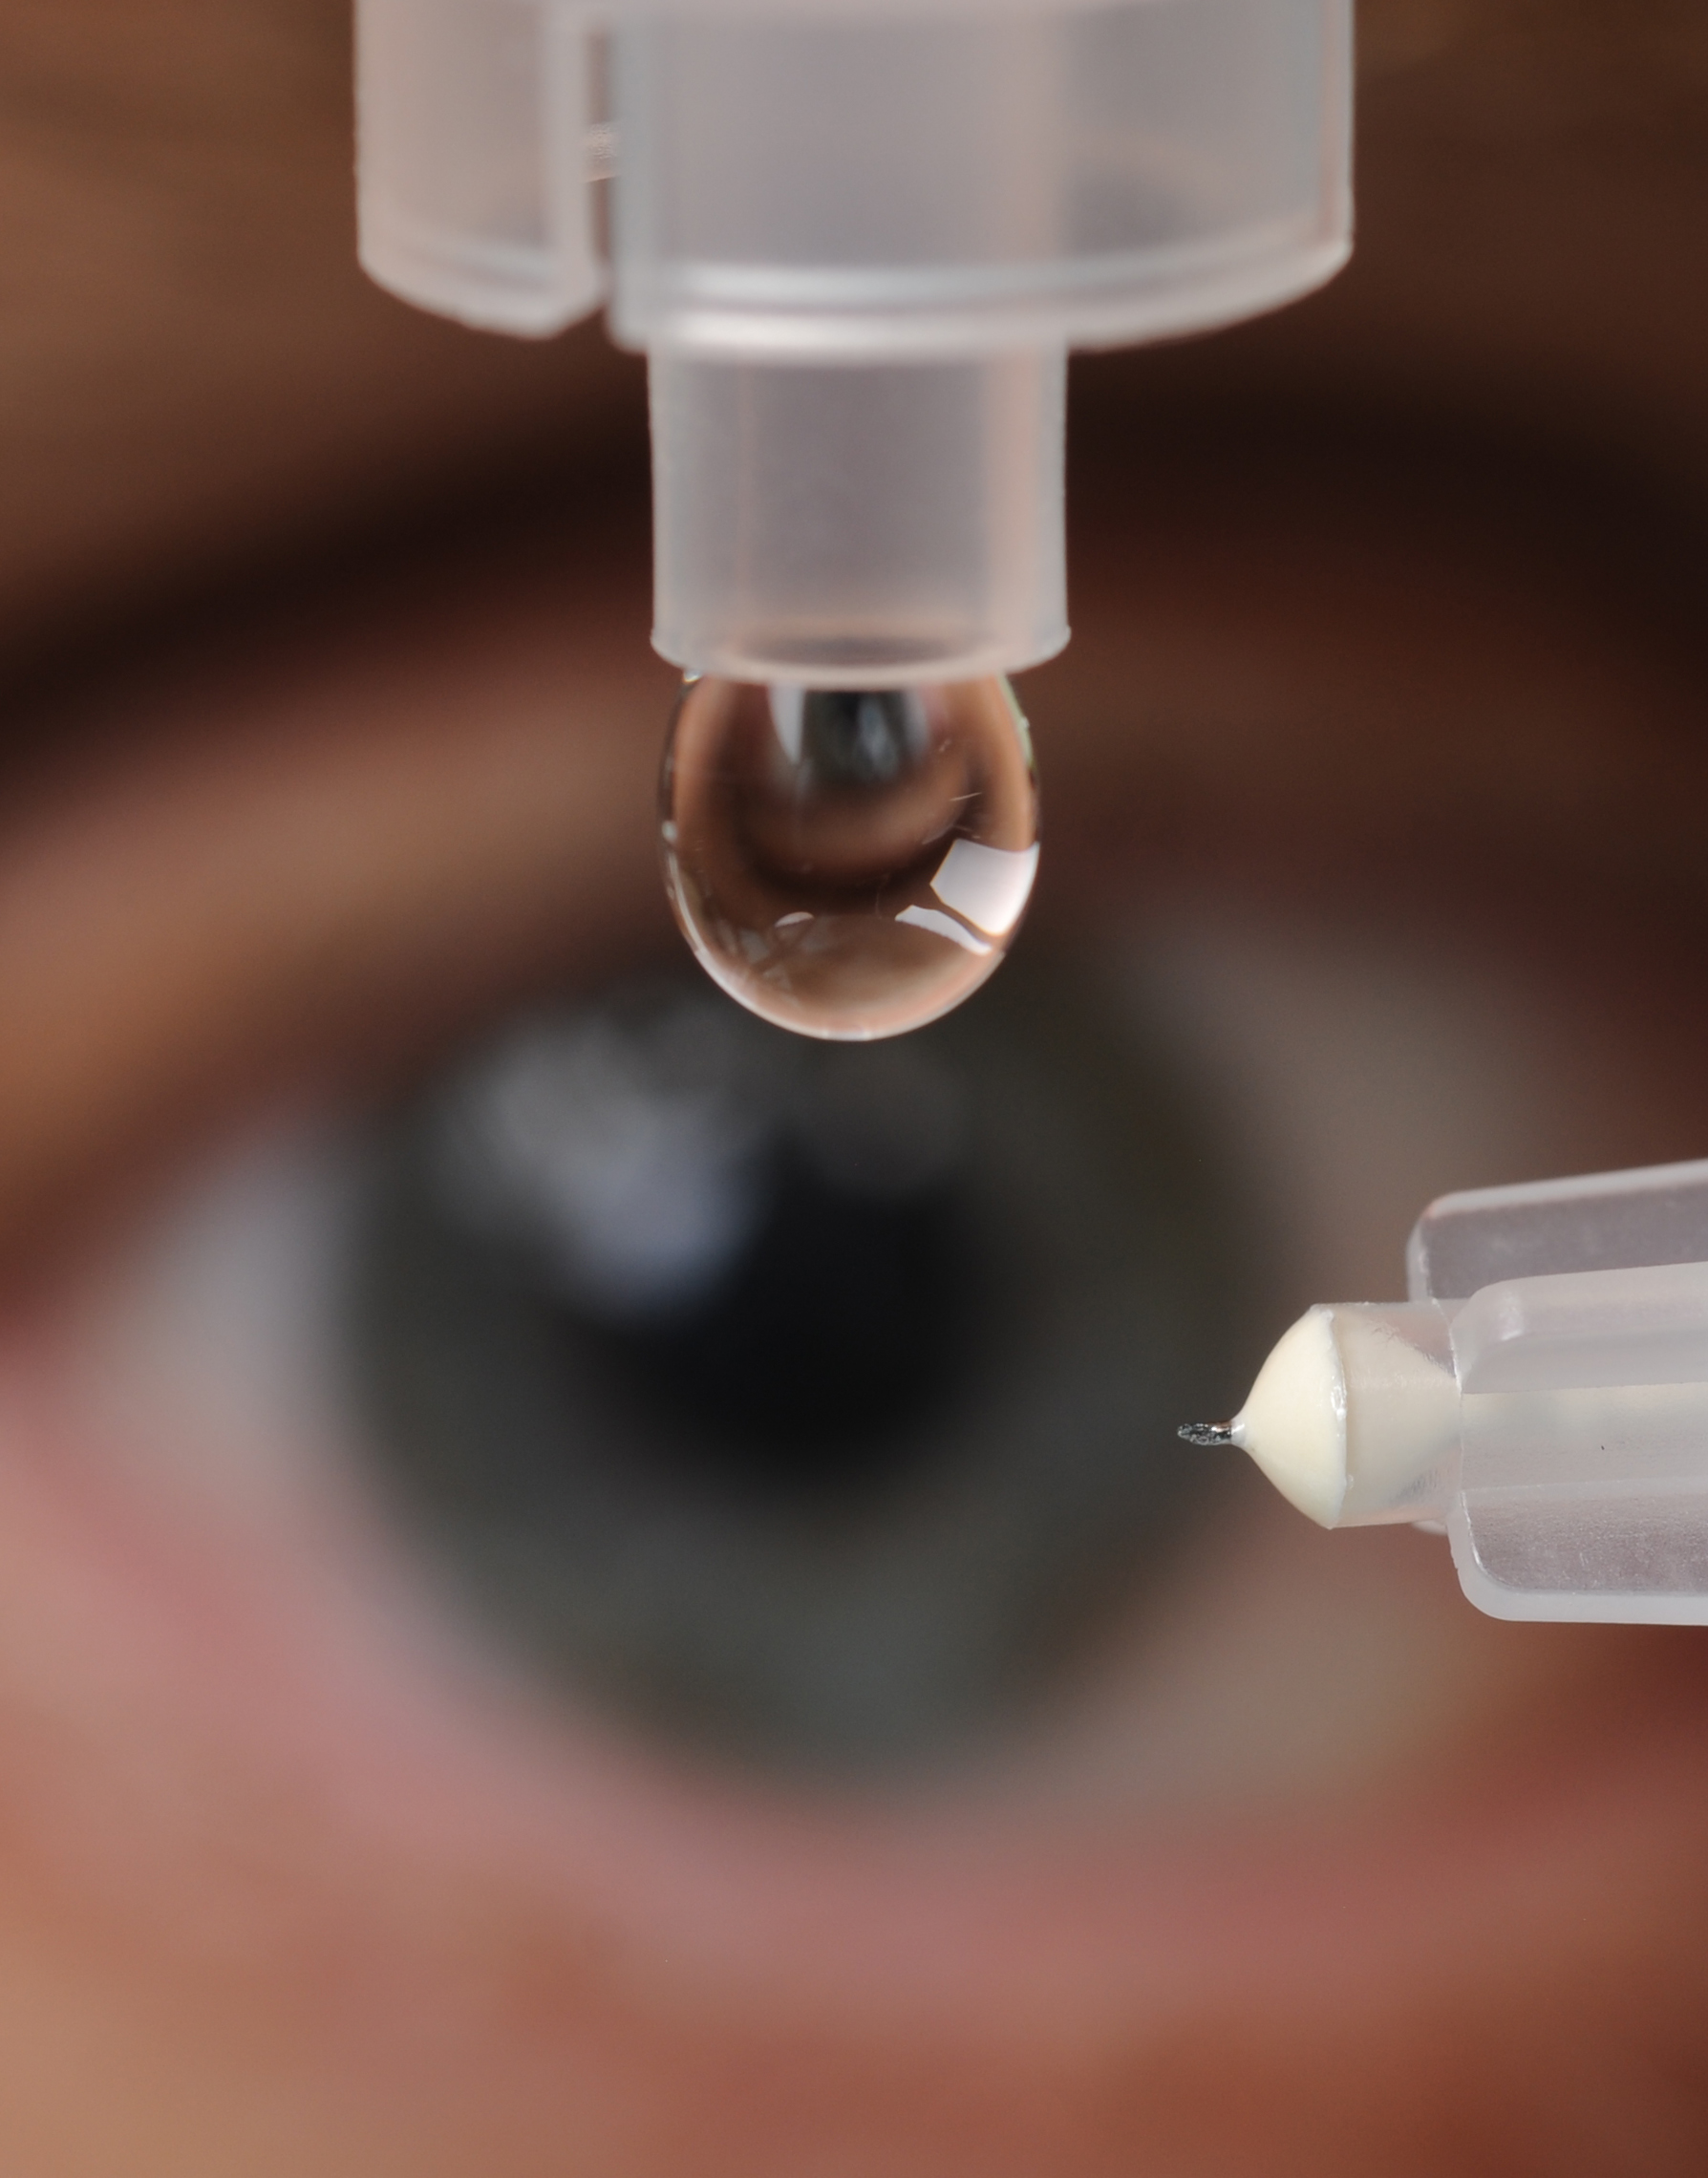 A microneedle used to inject glaucoma medications into the eye is shown next to a liquid drop from a conventional eye dropper. (Photo credit: Gary Meek).